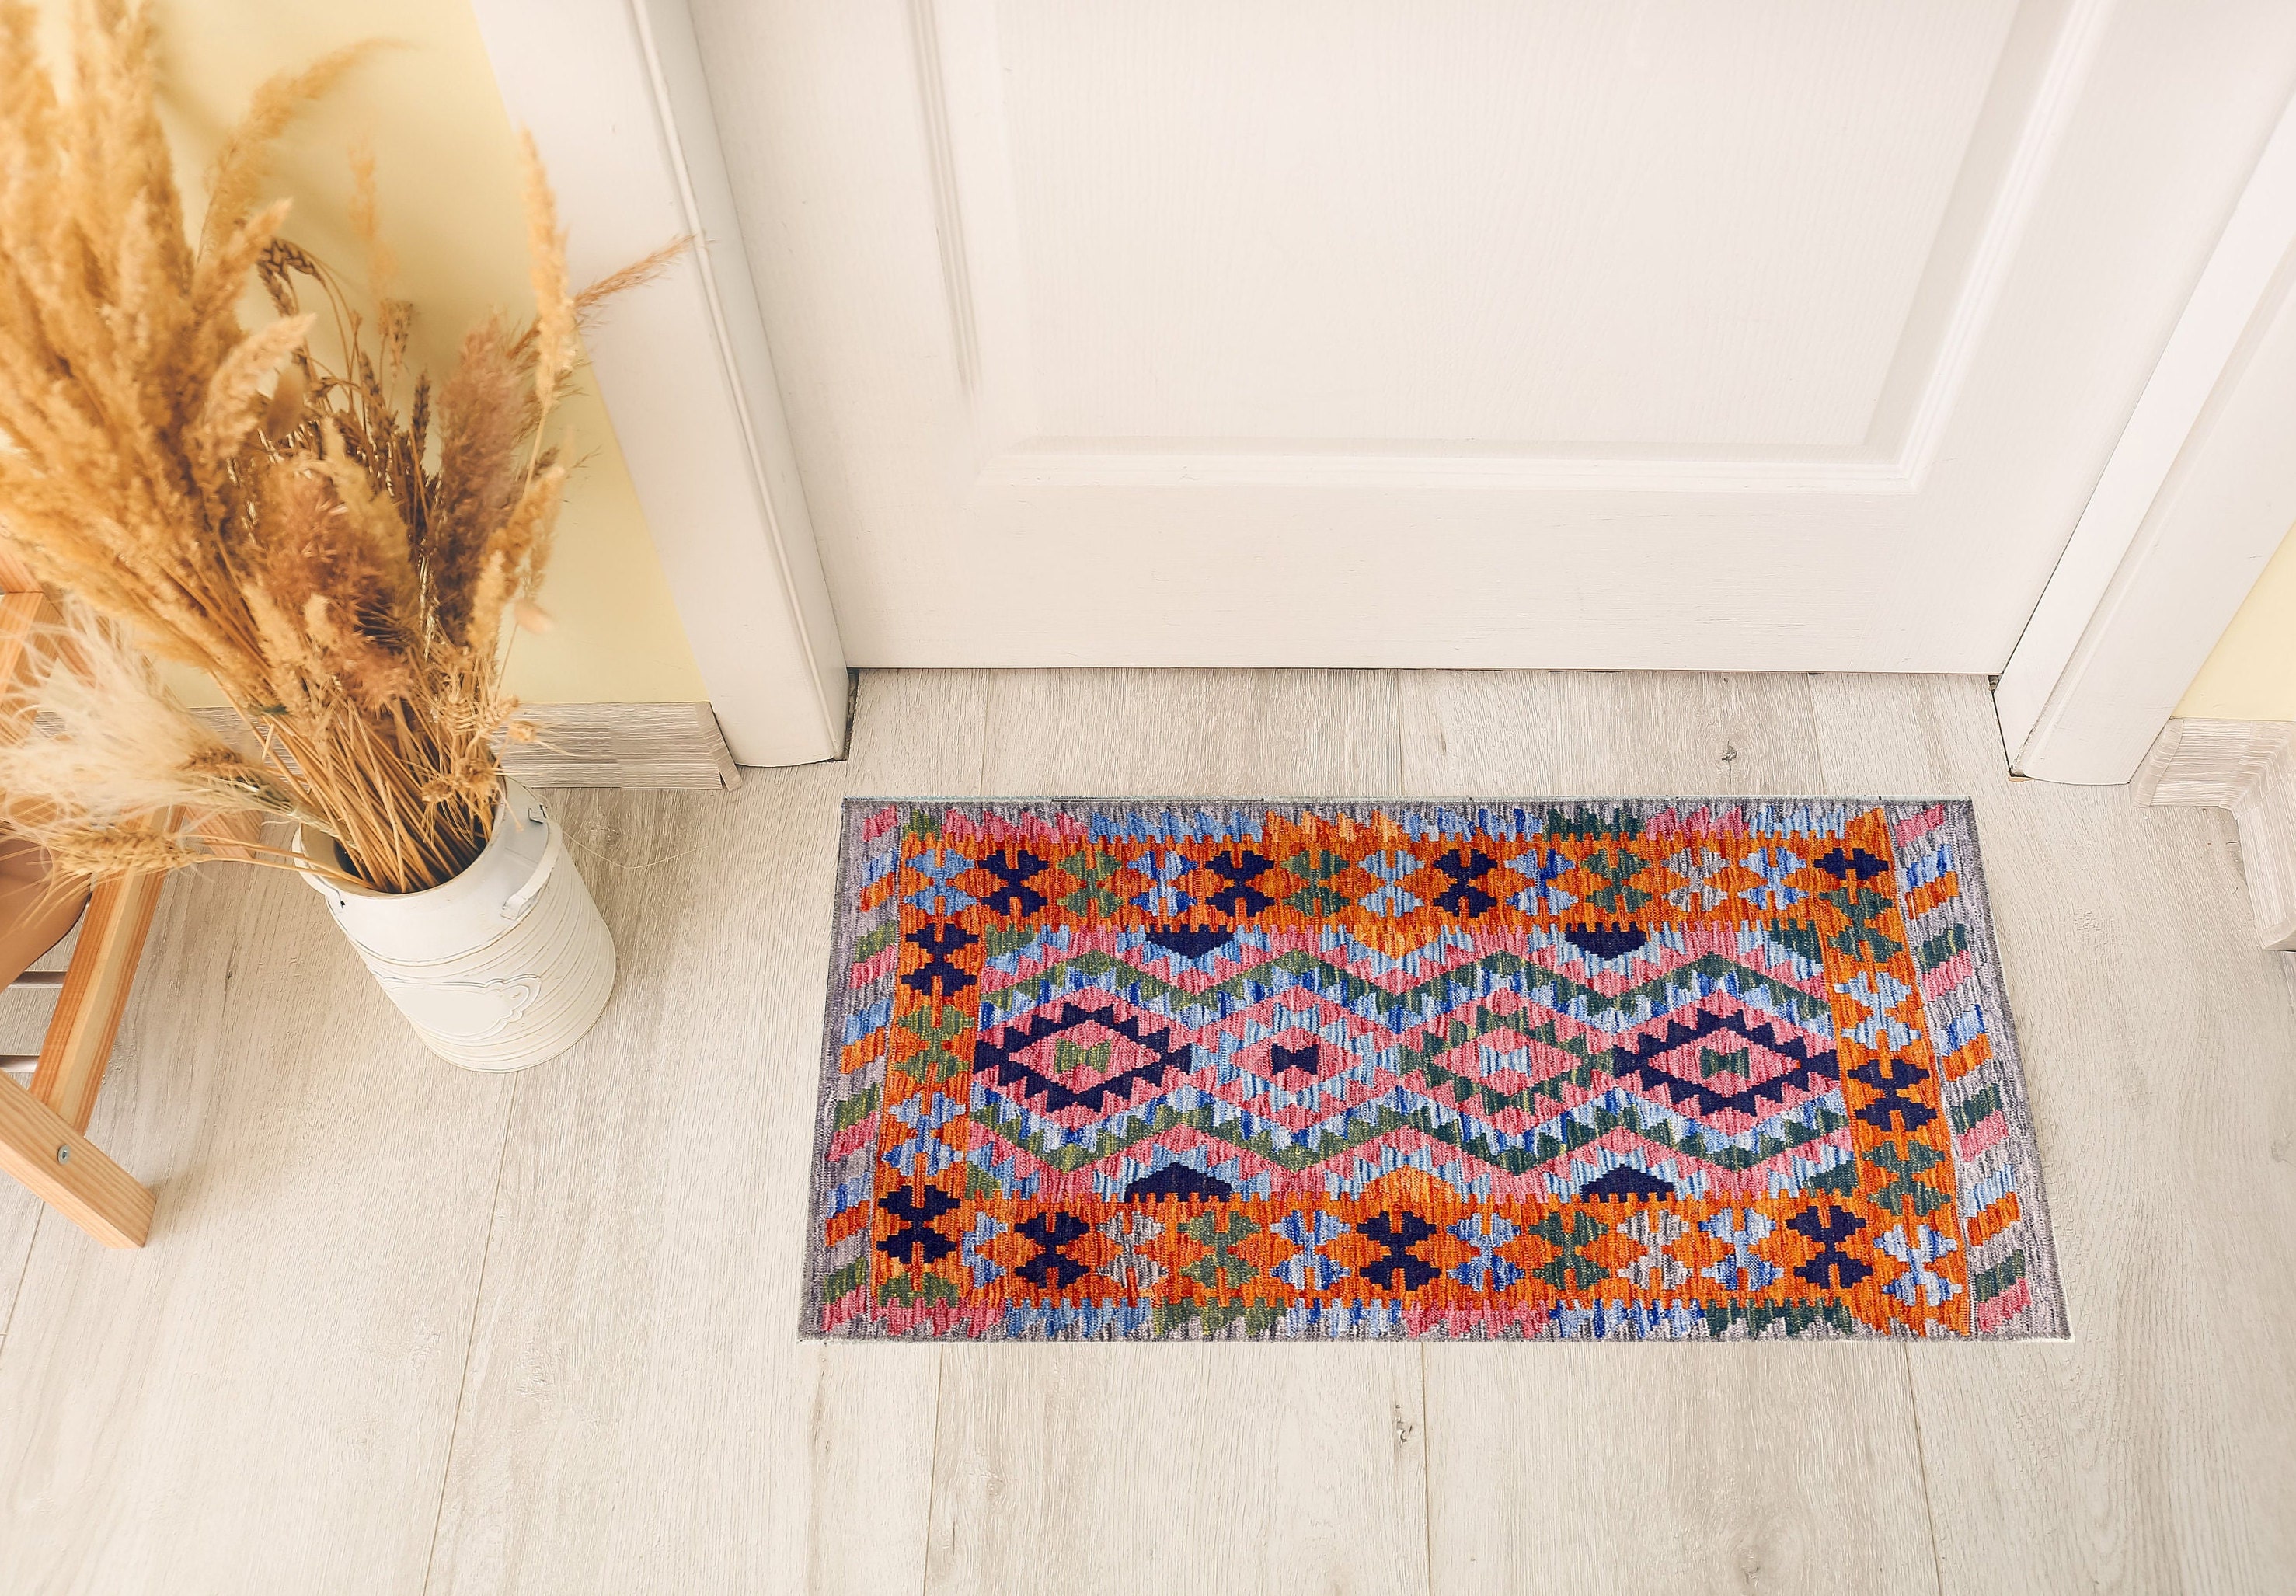 1/10 Inch Ultra Thin Front Door Mat Rug Indoor Entrance inside Non Slip,  Large W